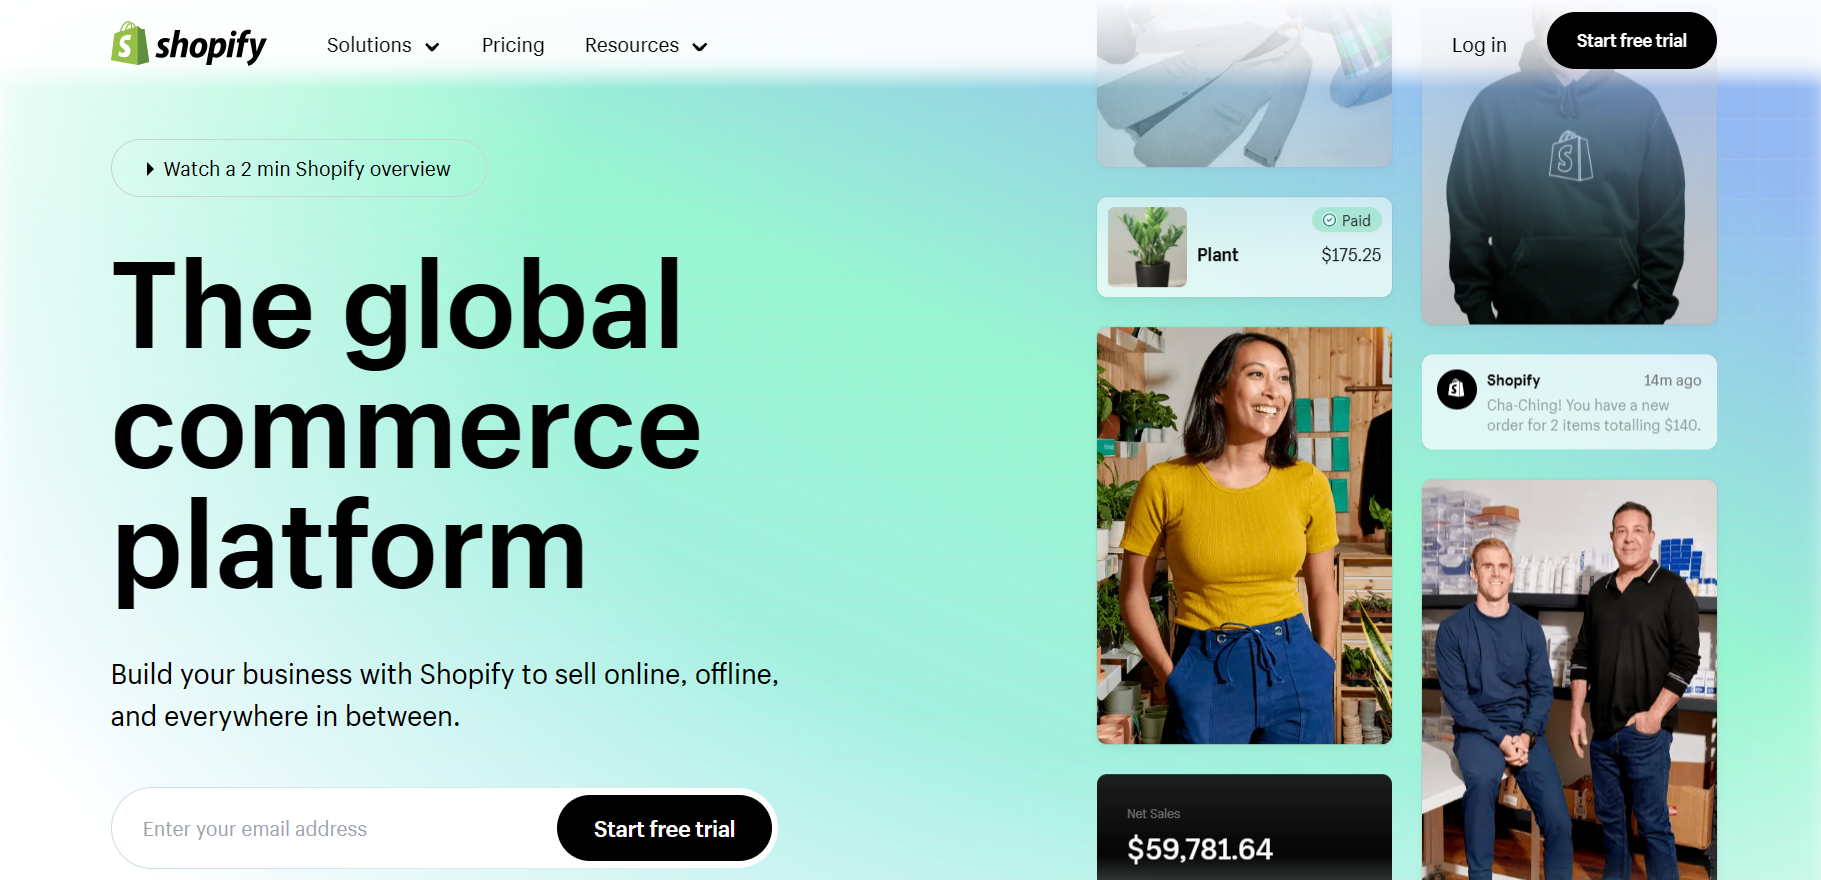 Shopify Features: A Comprehensive Guide to the Tools and Functionality of the Ecommerce Platform